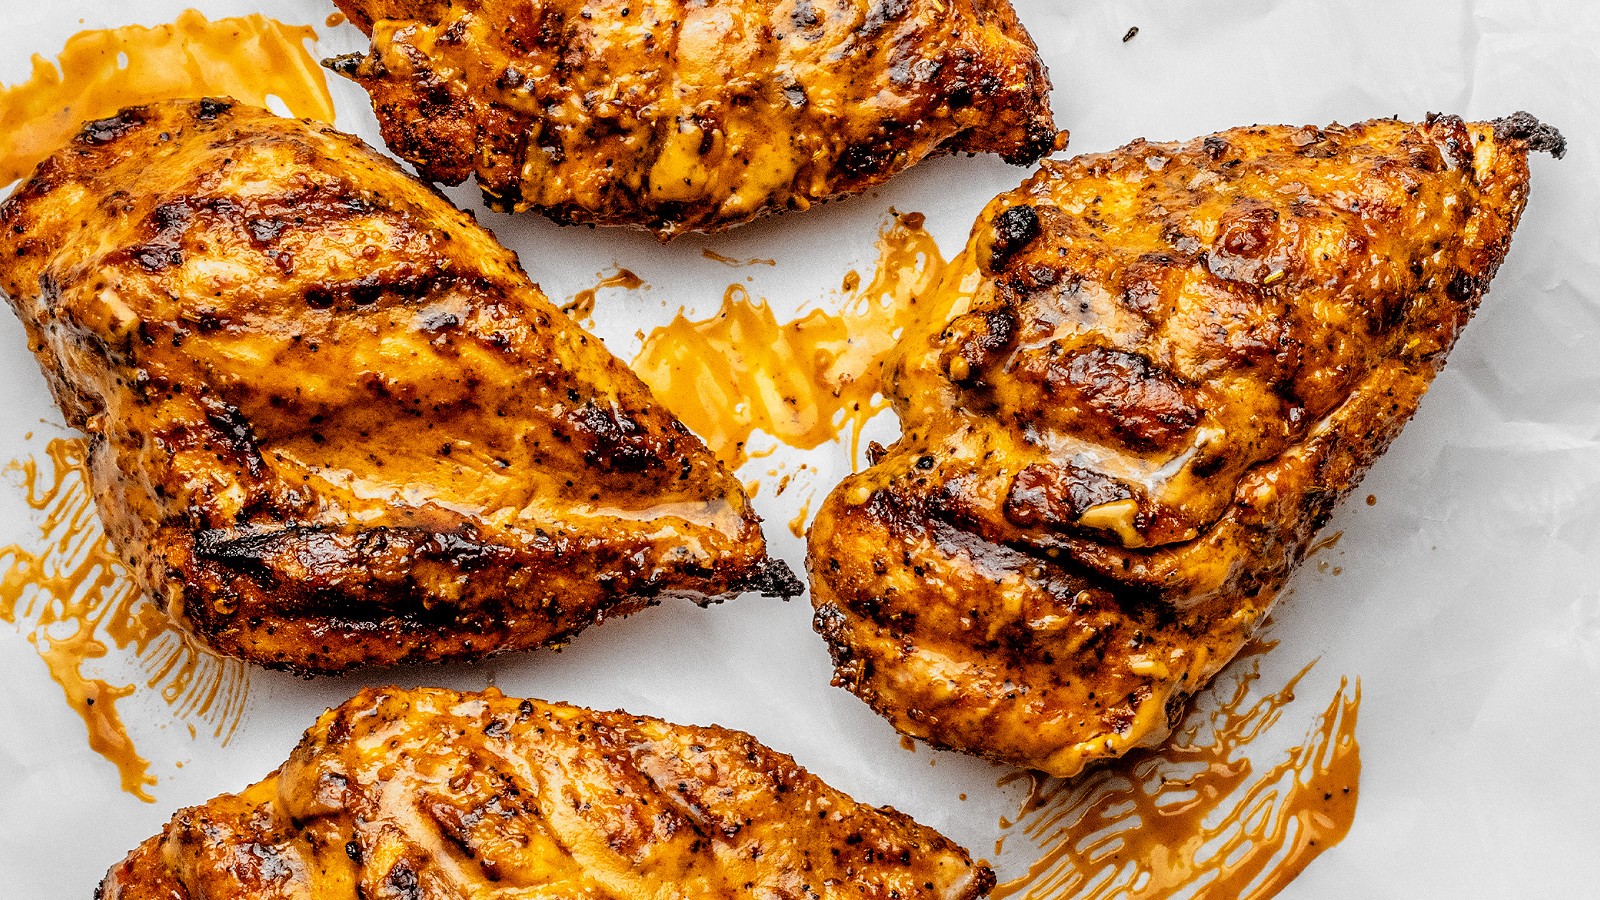 Image of Grilled Buffalo Chicken Breast